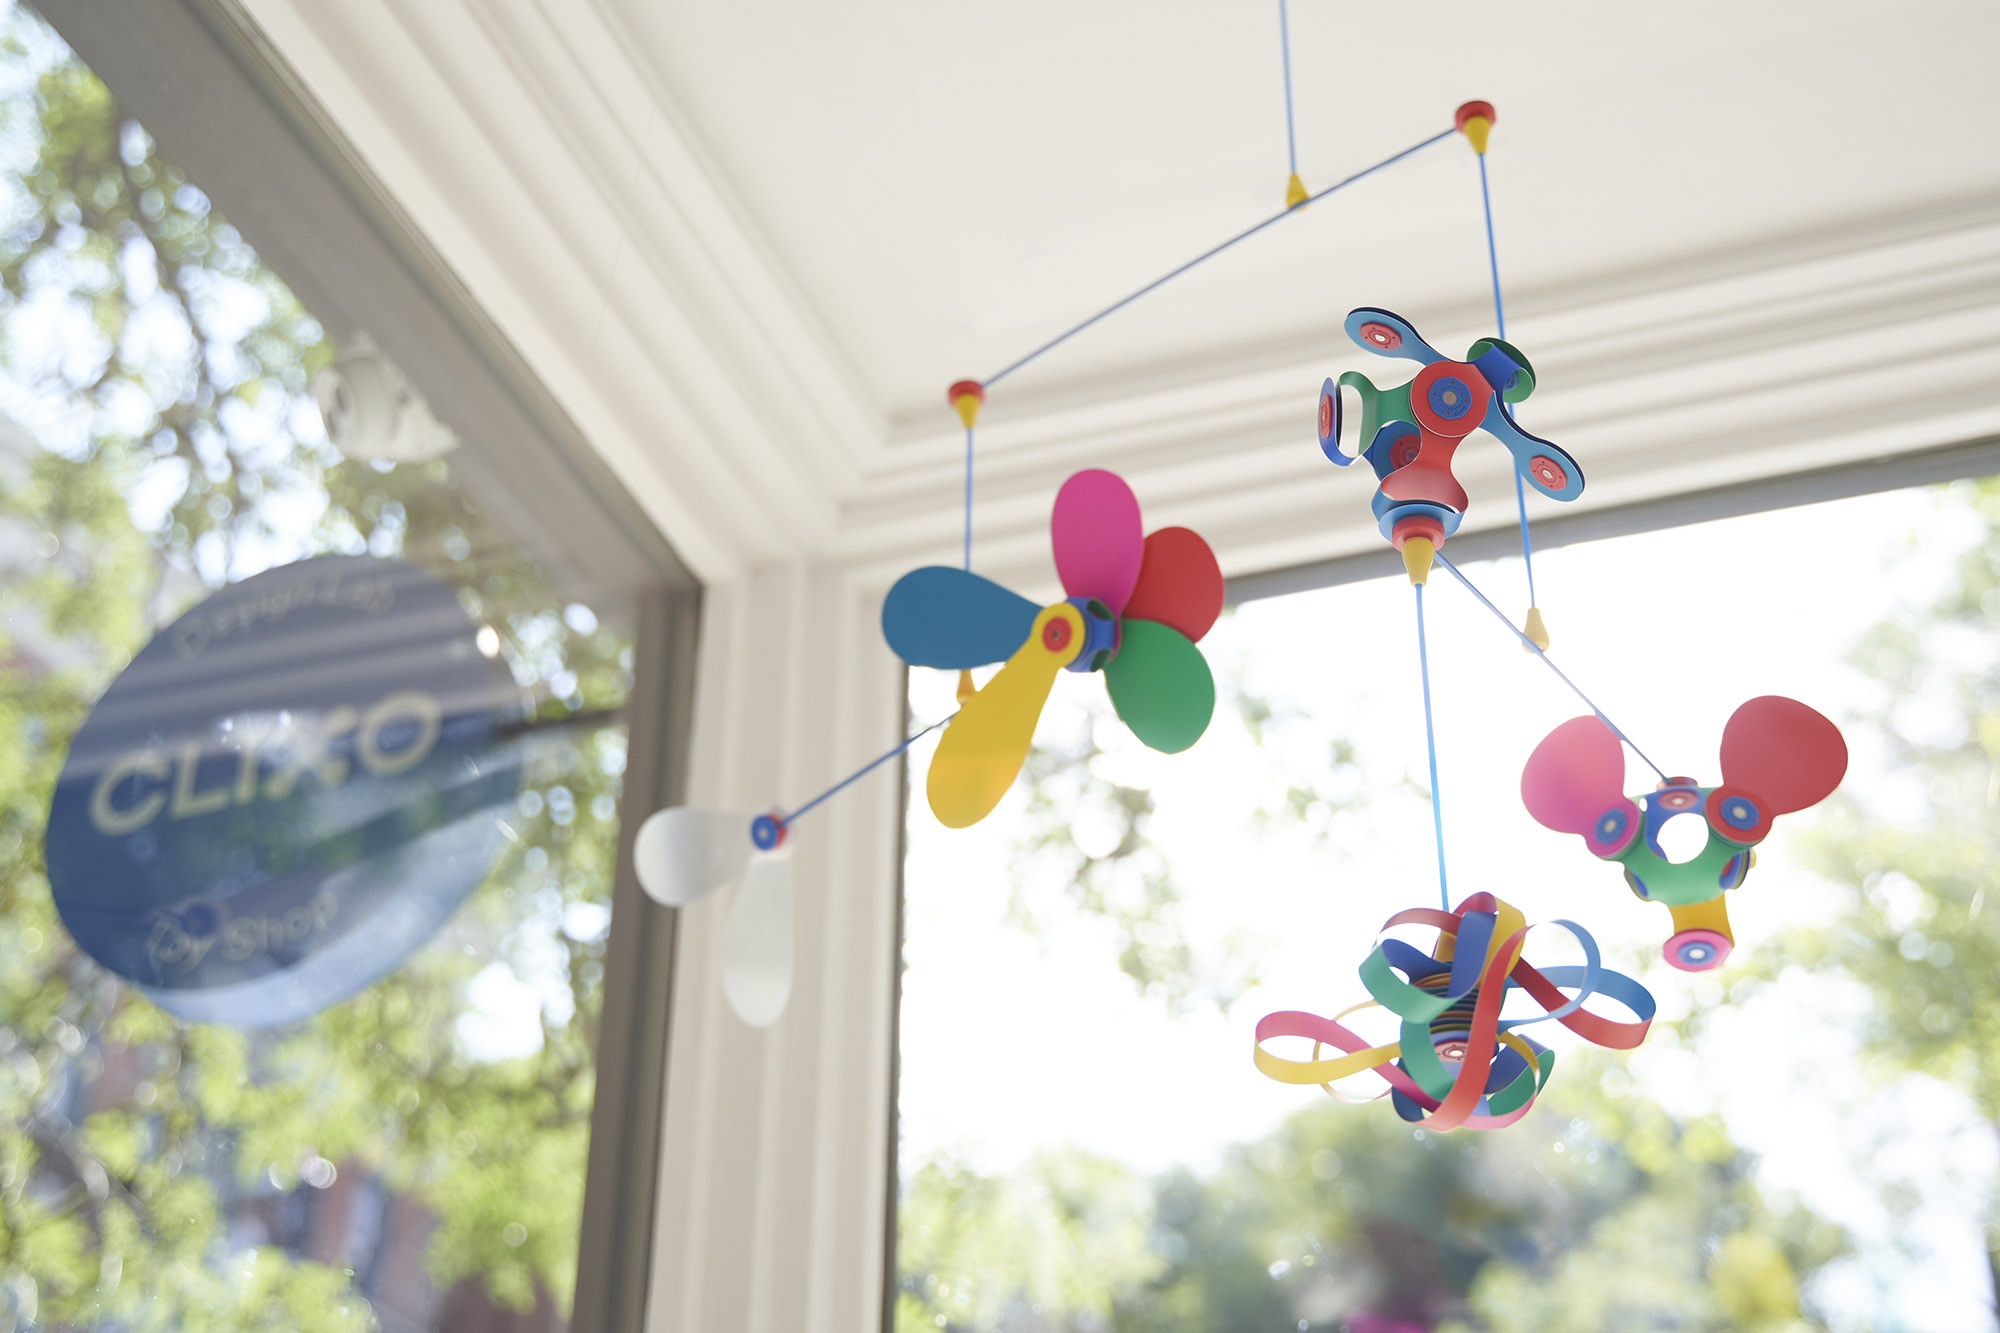 The Clixo mobile is gracefully hanging in our Brooklyn store, creating a playful and interactive atmosphere